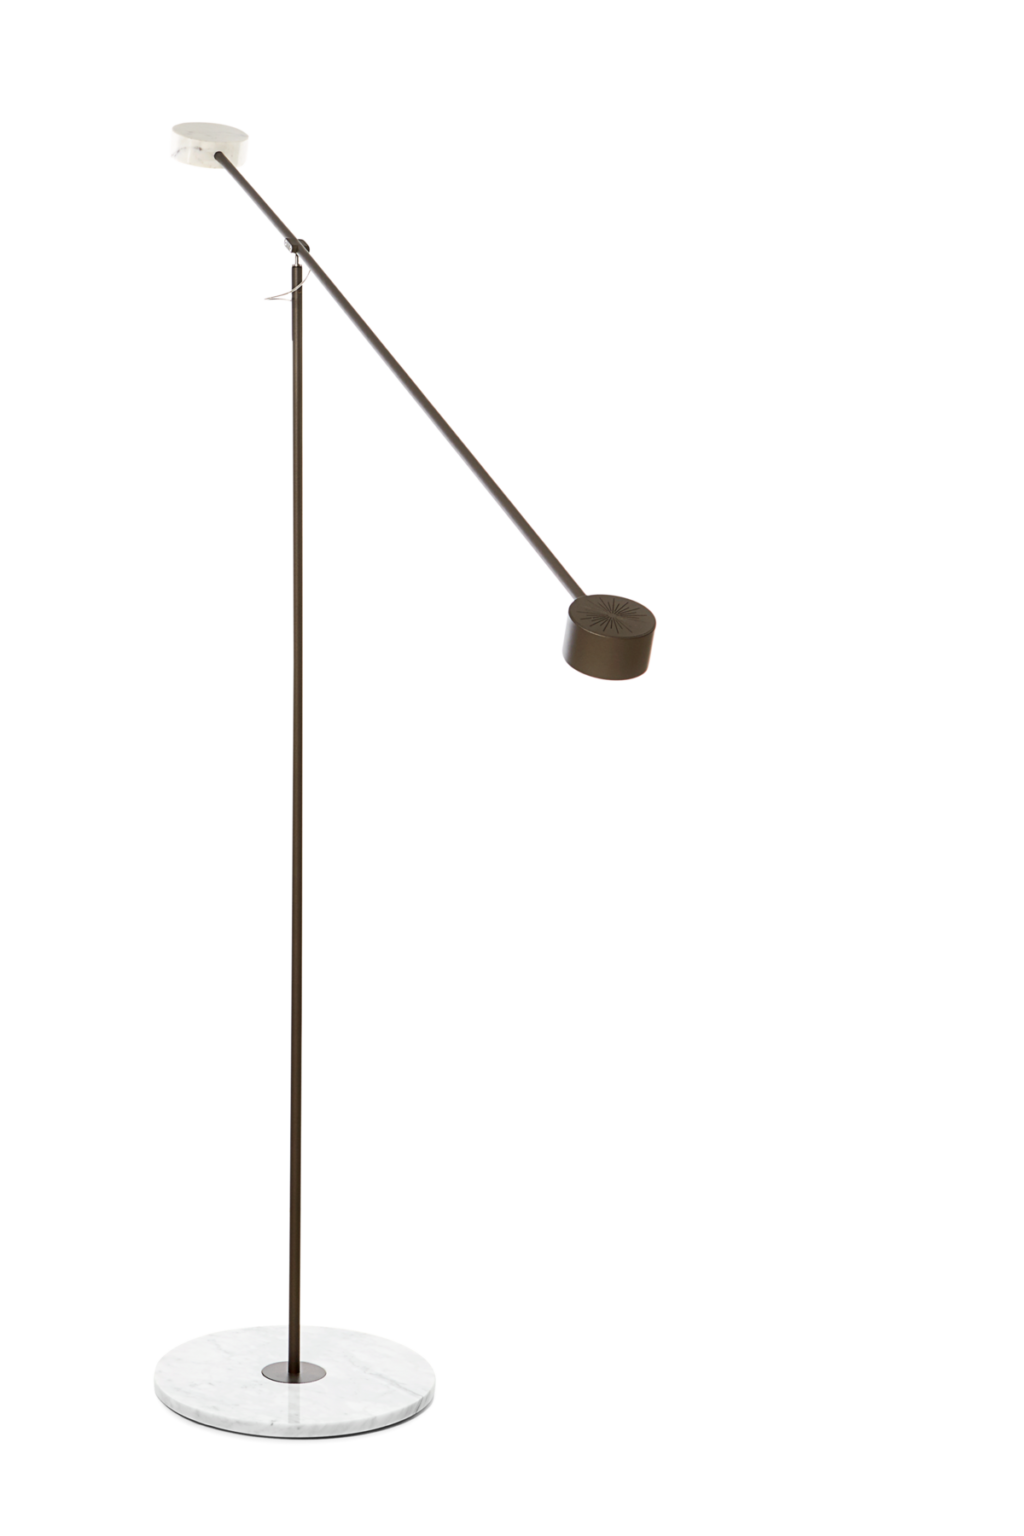 https://desidea.hu/wp-content/uploads/fly-images/160227/moooi-T-lamp-allolampa3-1024x0.png